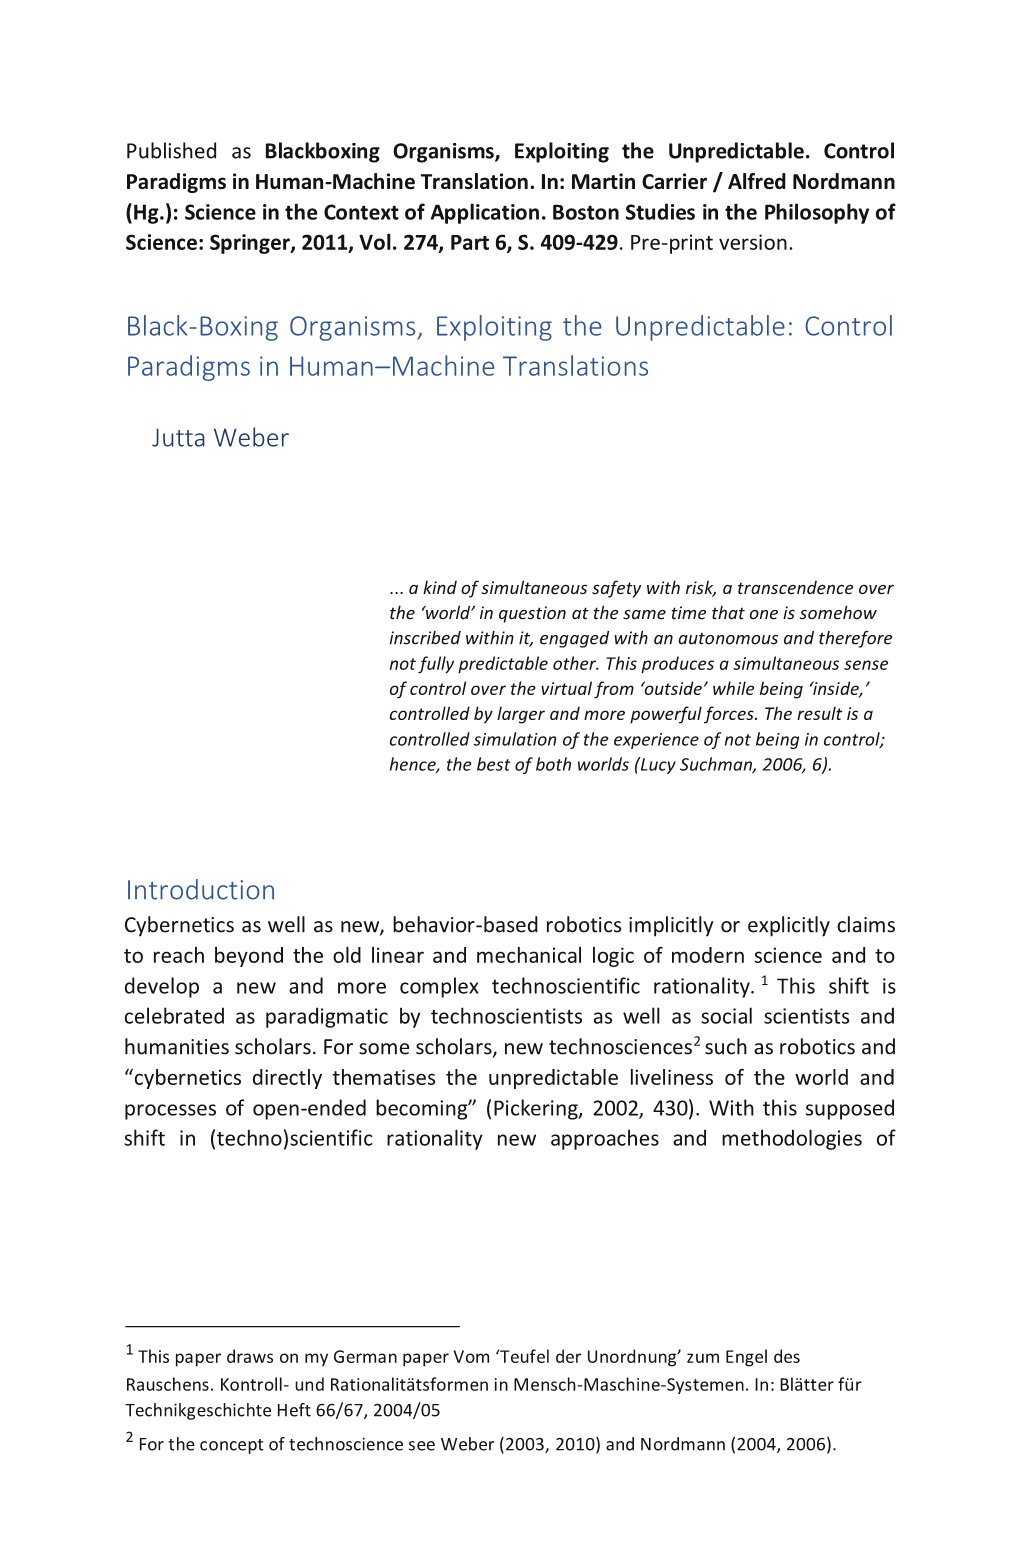 Black-Boxing Organisms, Exploiting the Unpredictable: Control Paradigms in Human–Machine Translations